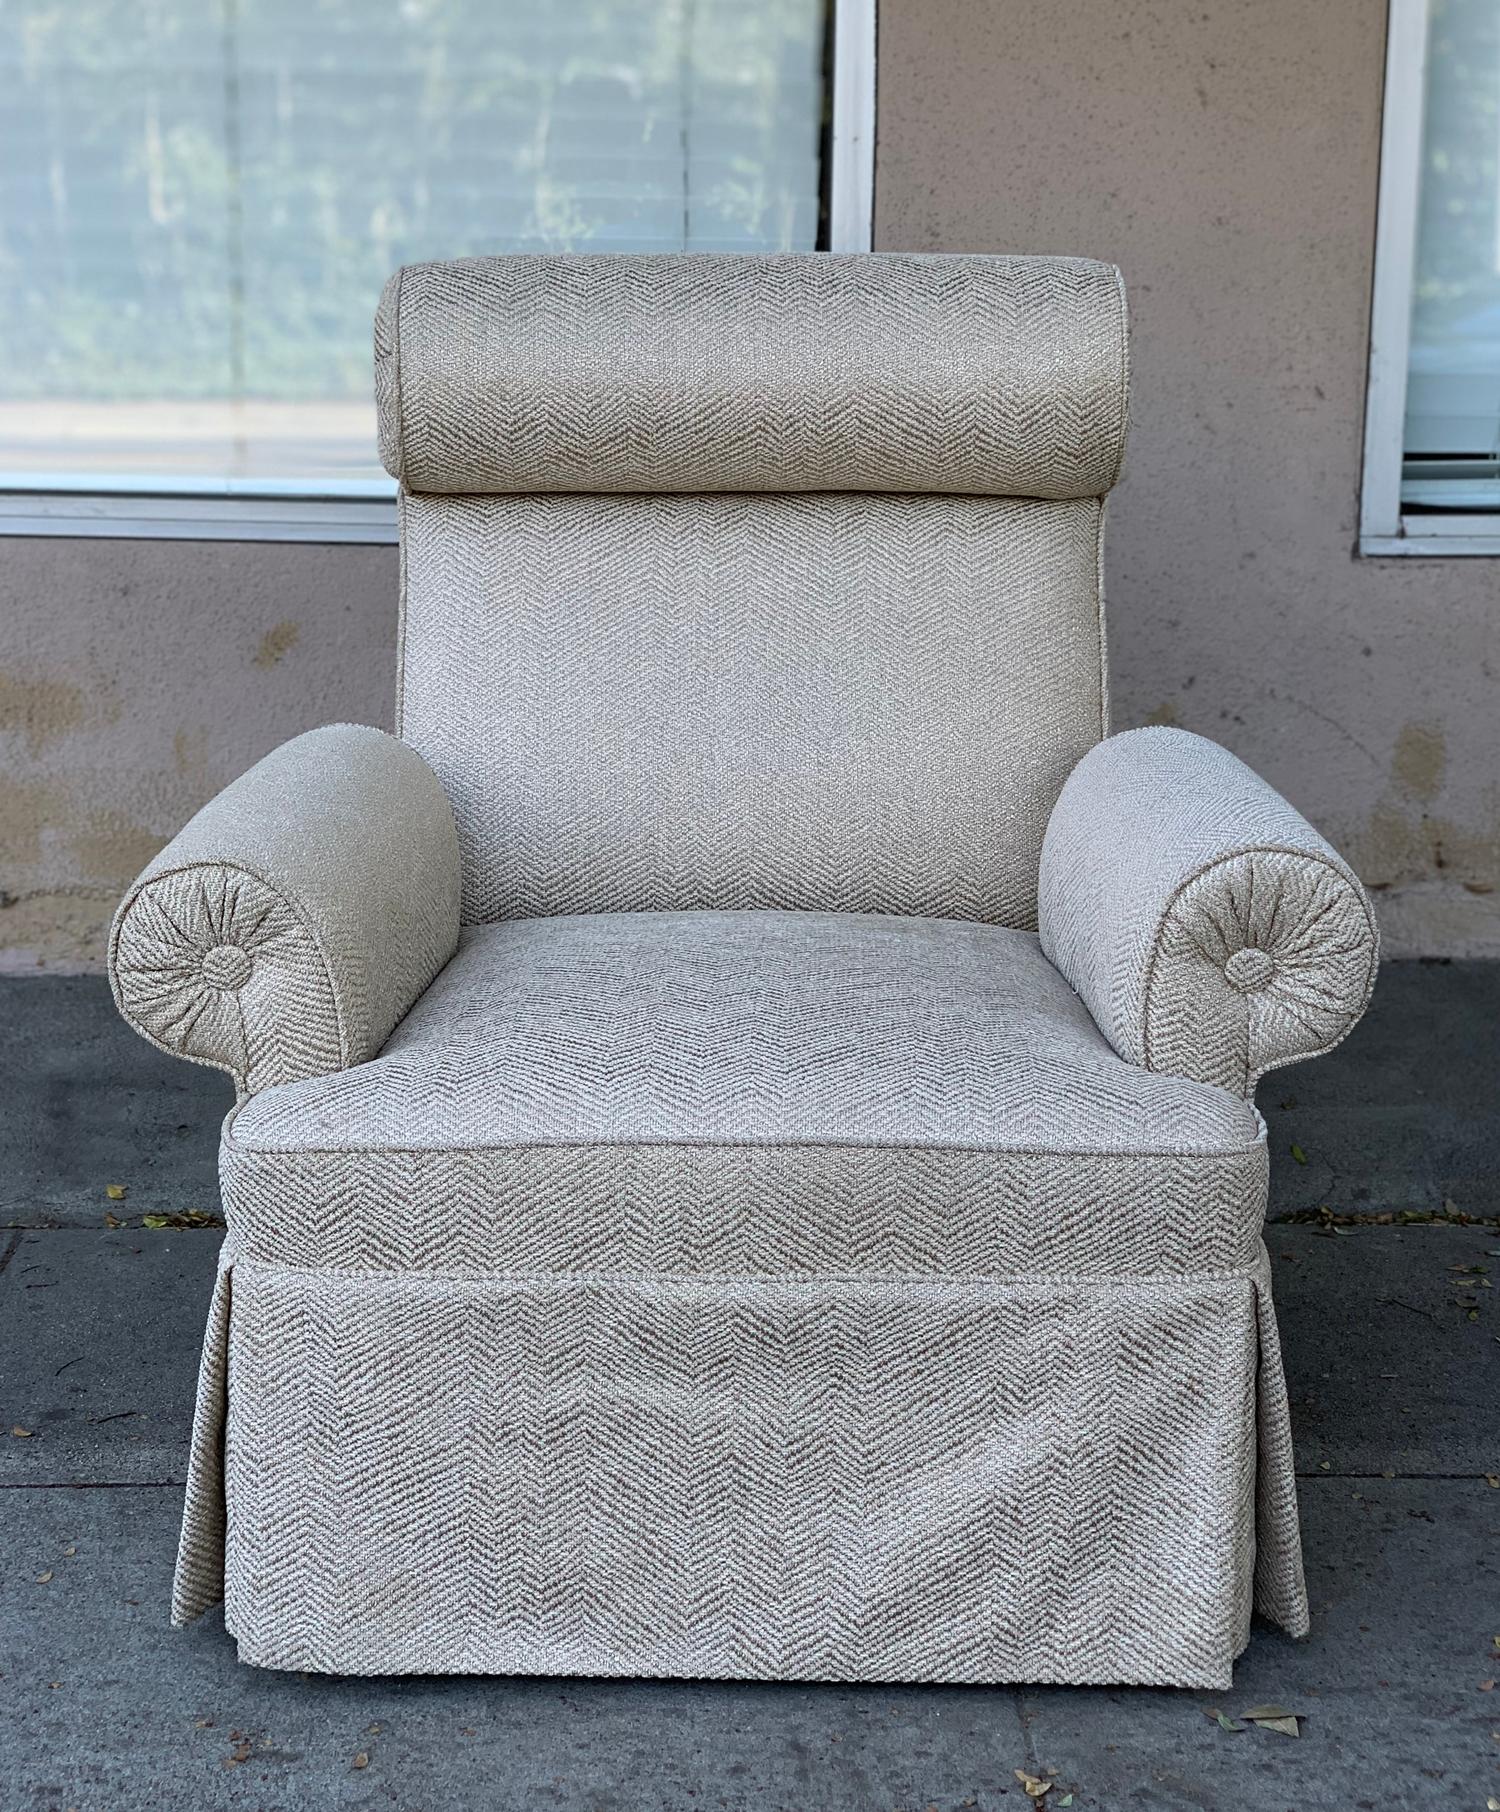 Napoleon armchair with rolled arms and backrest upholstered in a beautiful cream color cotton fabric.
37” high x 35.5” wide (outside armrests) x 35” deep x 16” seat height x 22” seat depth x 20.5” seat width x 25.5” arm height from floor x 7” arm